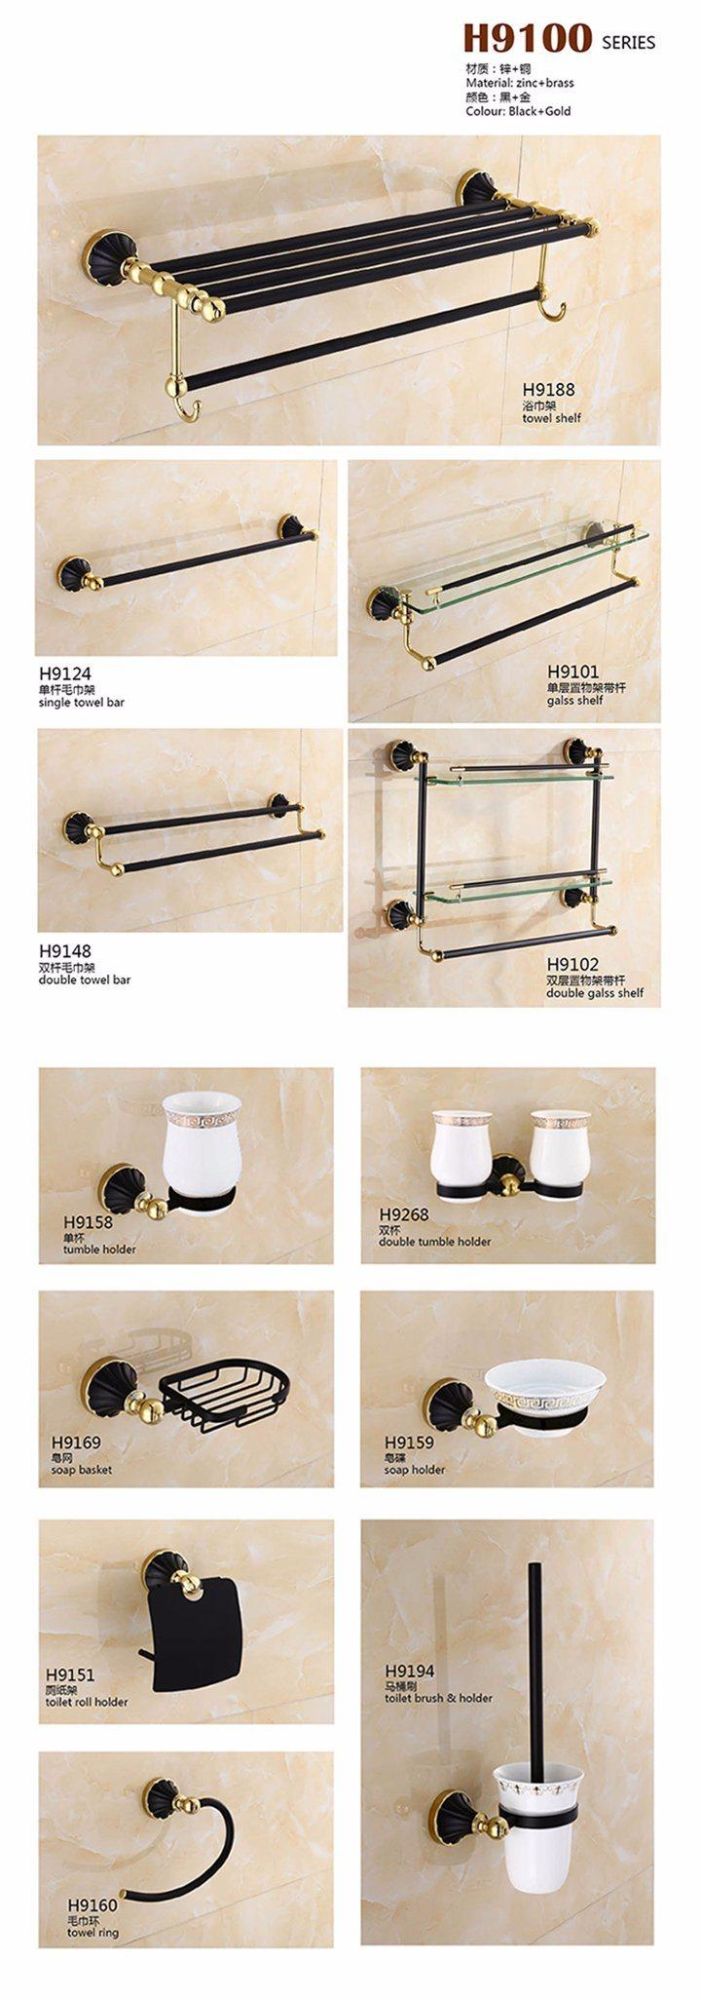 Foshan Bathroom Toilet Brush and Holder Set Accessories with Alumimun Material 6300 Series